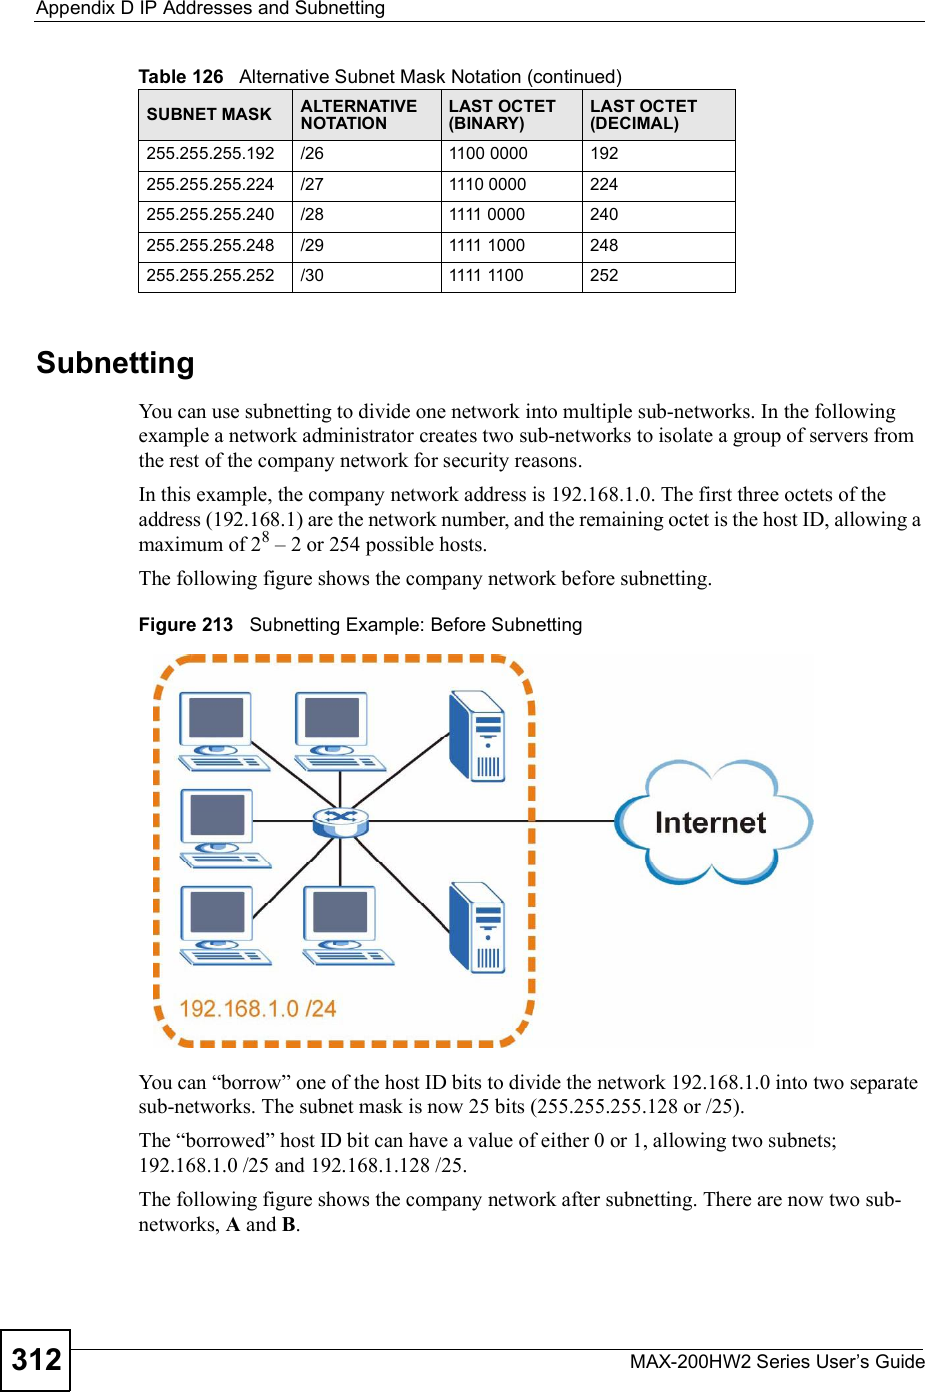 Appendix DIP Addresses and SubnettingMAX-200HW2 Series User s Guide312SubnettingYou can use subnetting to divide one network into multiple sub-networks. In the following example a network administrator creates two sub-networks to isolate a group of servers from the rest of the company network for security reasons.In this example, the company network address is 192.168.1.0. The first three octets of the address (192.168.1) are the network number, and the remaining octet is the host ID, allowing a maximum of 28 % 2 or 254 possible hosts.The following figure shows the company network before subnetting.  Figure 213   Subnetting Example: Before SubnettingYou can &quot;borrow# one of the host ID bits to divide the network 192.168.1.0 into two separate sub-networks. The subnet mask is now 25 bits (255.255.255.128 or /25).The &quot;borrowed# host ID bit can have a value of either 0 or 1, allowing two subnets; 192.168.1.0 /25 and 192.168.1.128 /25. The following figure shows the company network after subnetting. There are now two sub-networks, A and B.255.255.255.192 /26 1100 0000 192255.255.255.224 /27 1110 0000 224255.255.255.240 /28 1111 0000 240255.255.255.248 /29 1111 1000 248255.255.255.252 /30 1111 1100 252Table 126   Alternative Subnet Mask Notation (continued)SUBNET MASK ALTERNATIVE NOTATIONLAST OCTET (BINARY)LAST OCTET (DECIMAL)